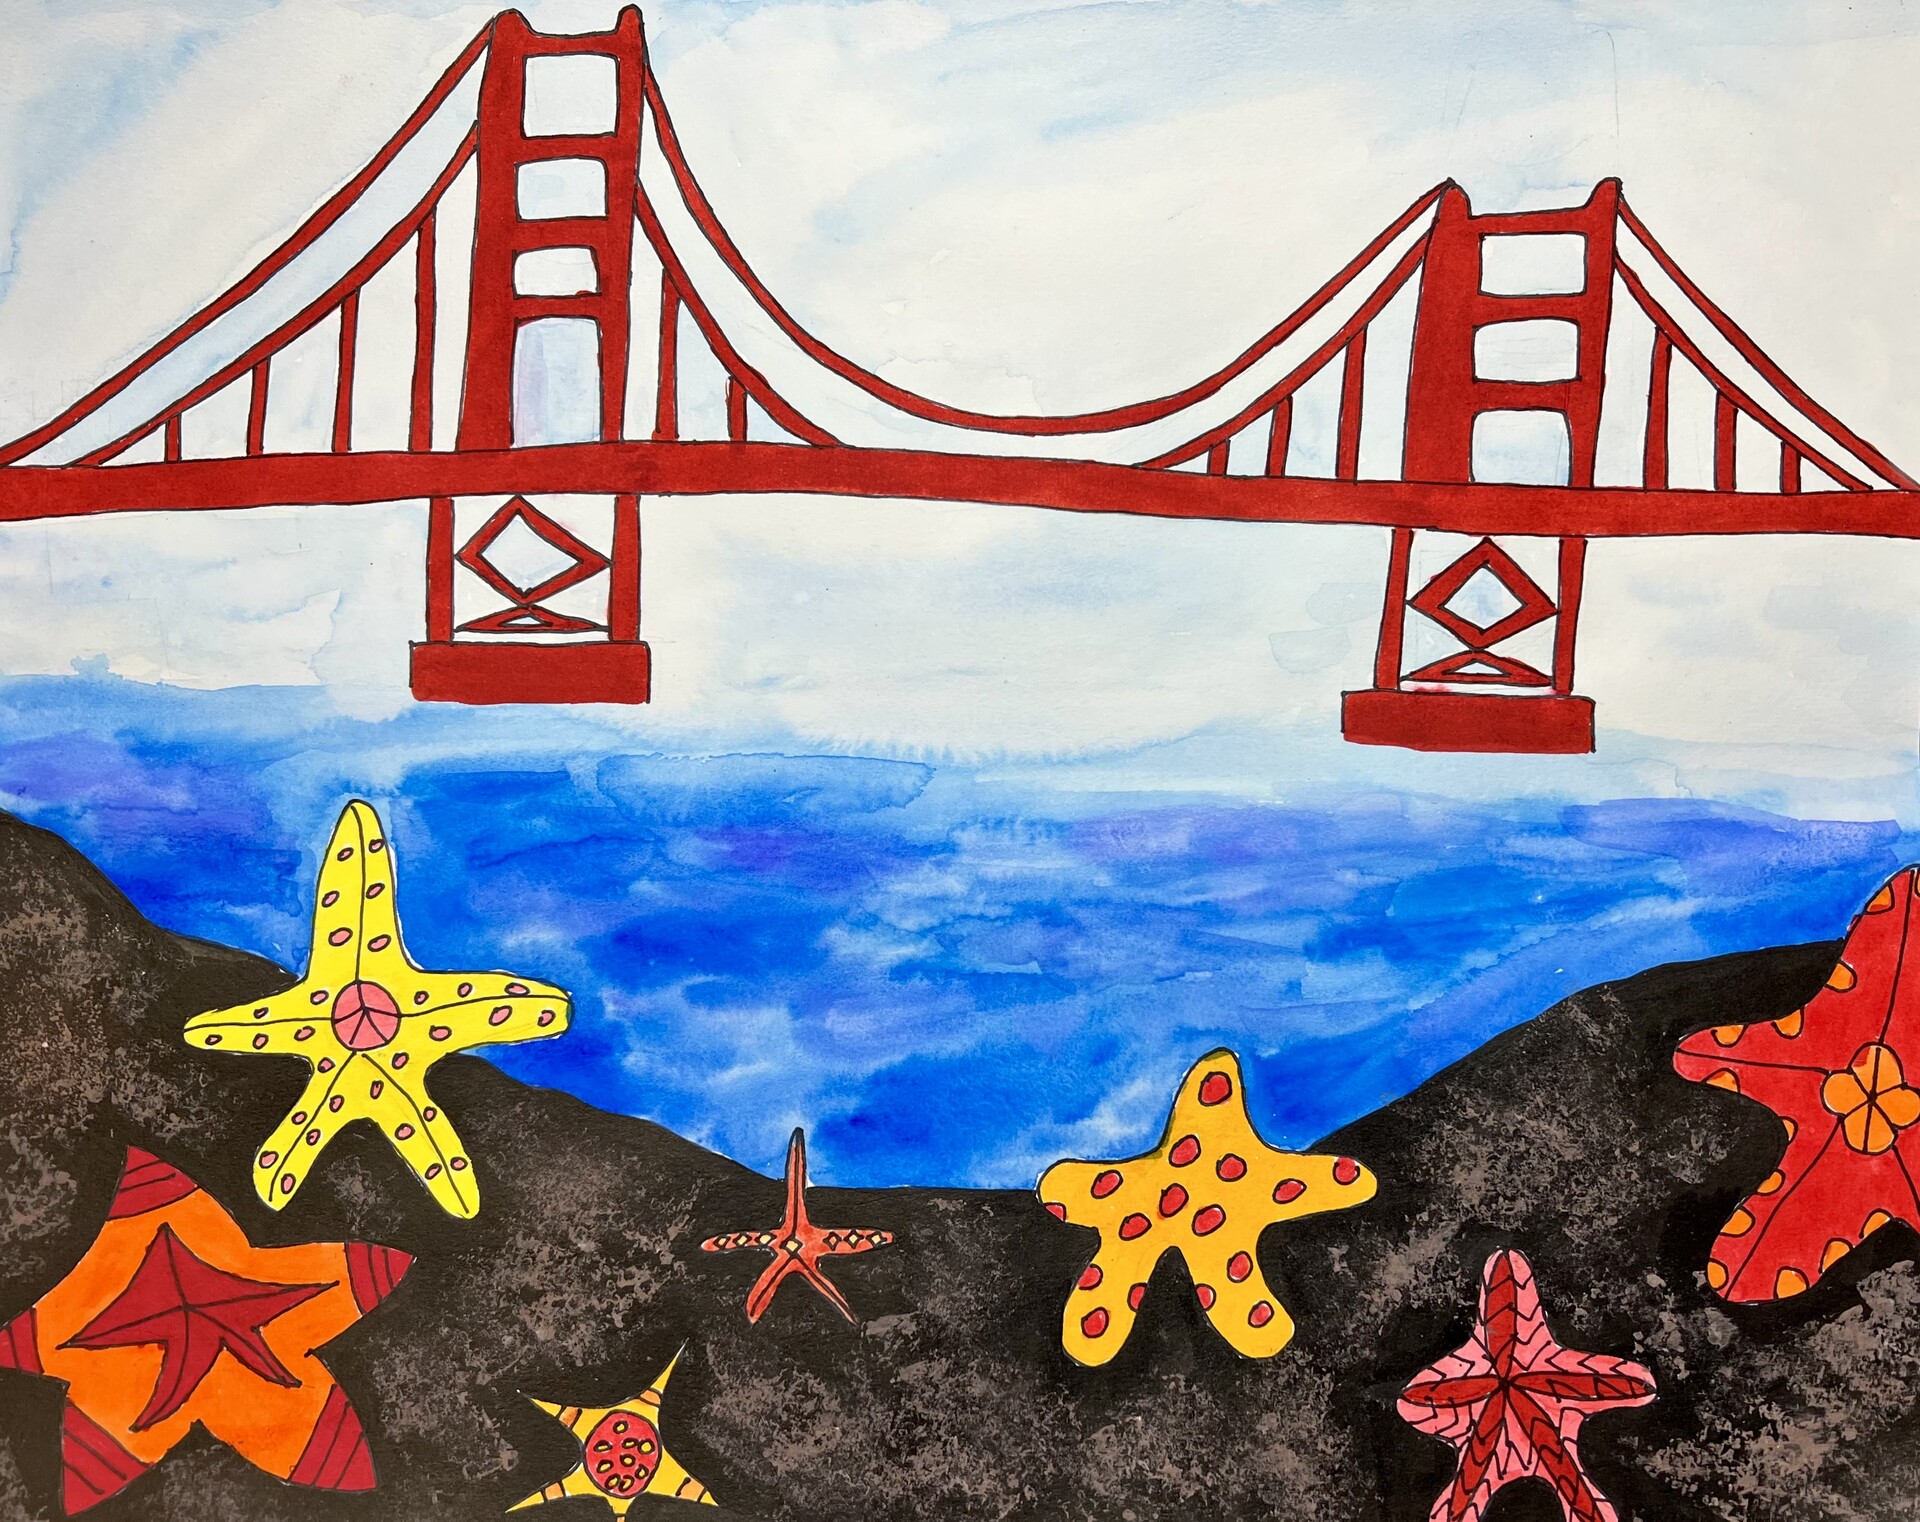 Starfish are in foreground, the Golden Gate Bridge in background